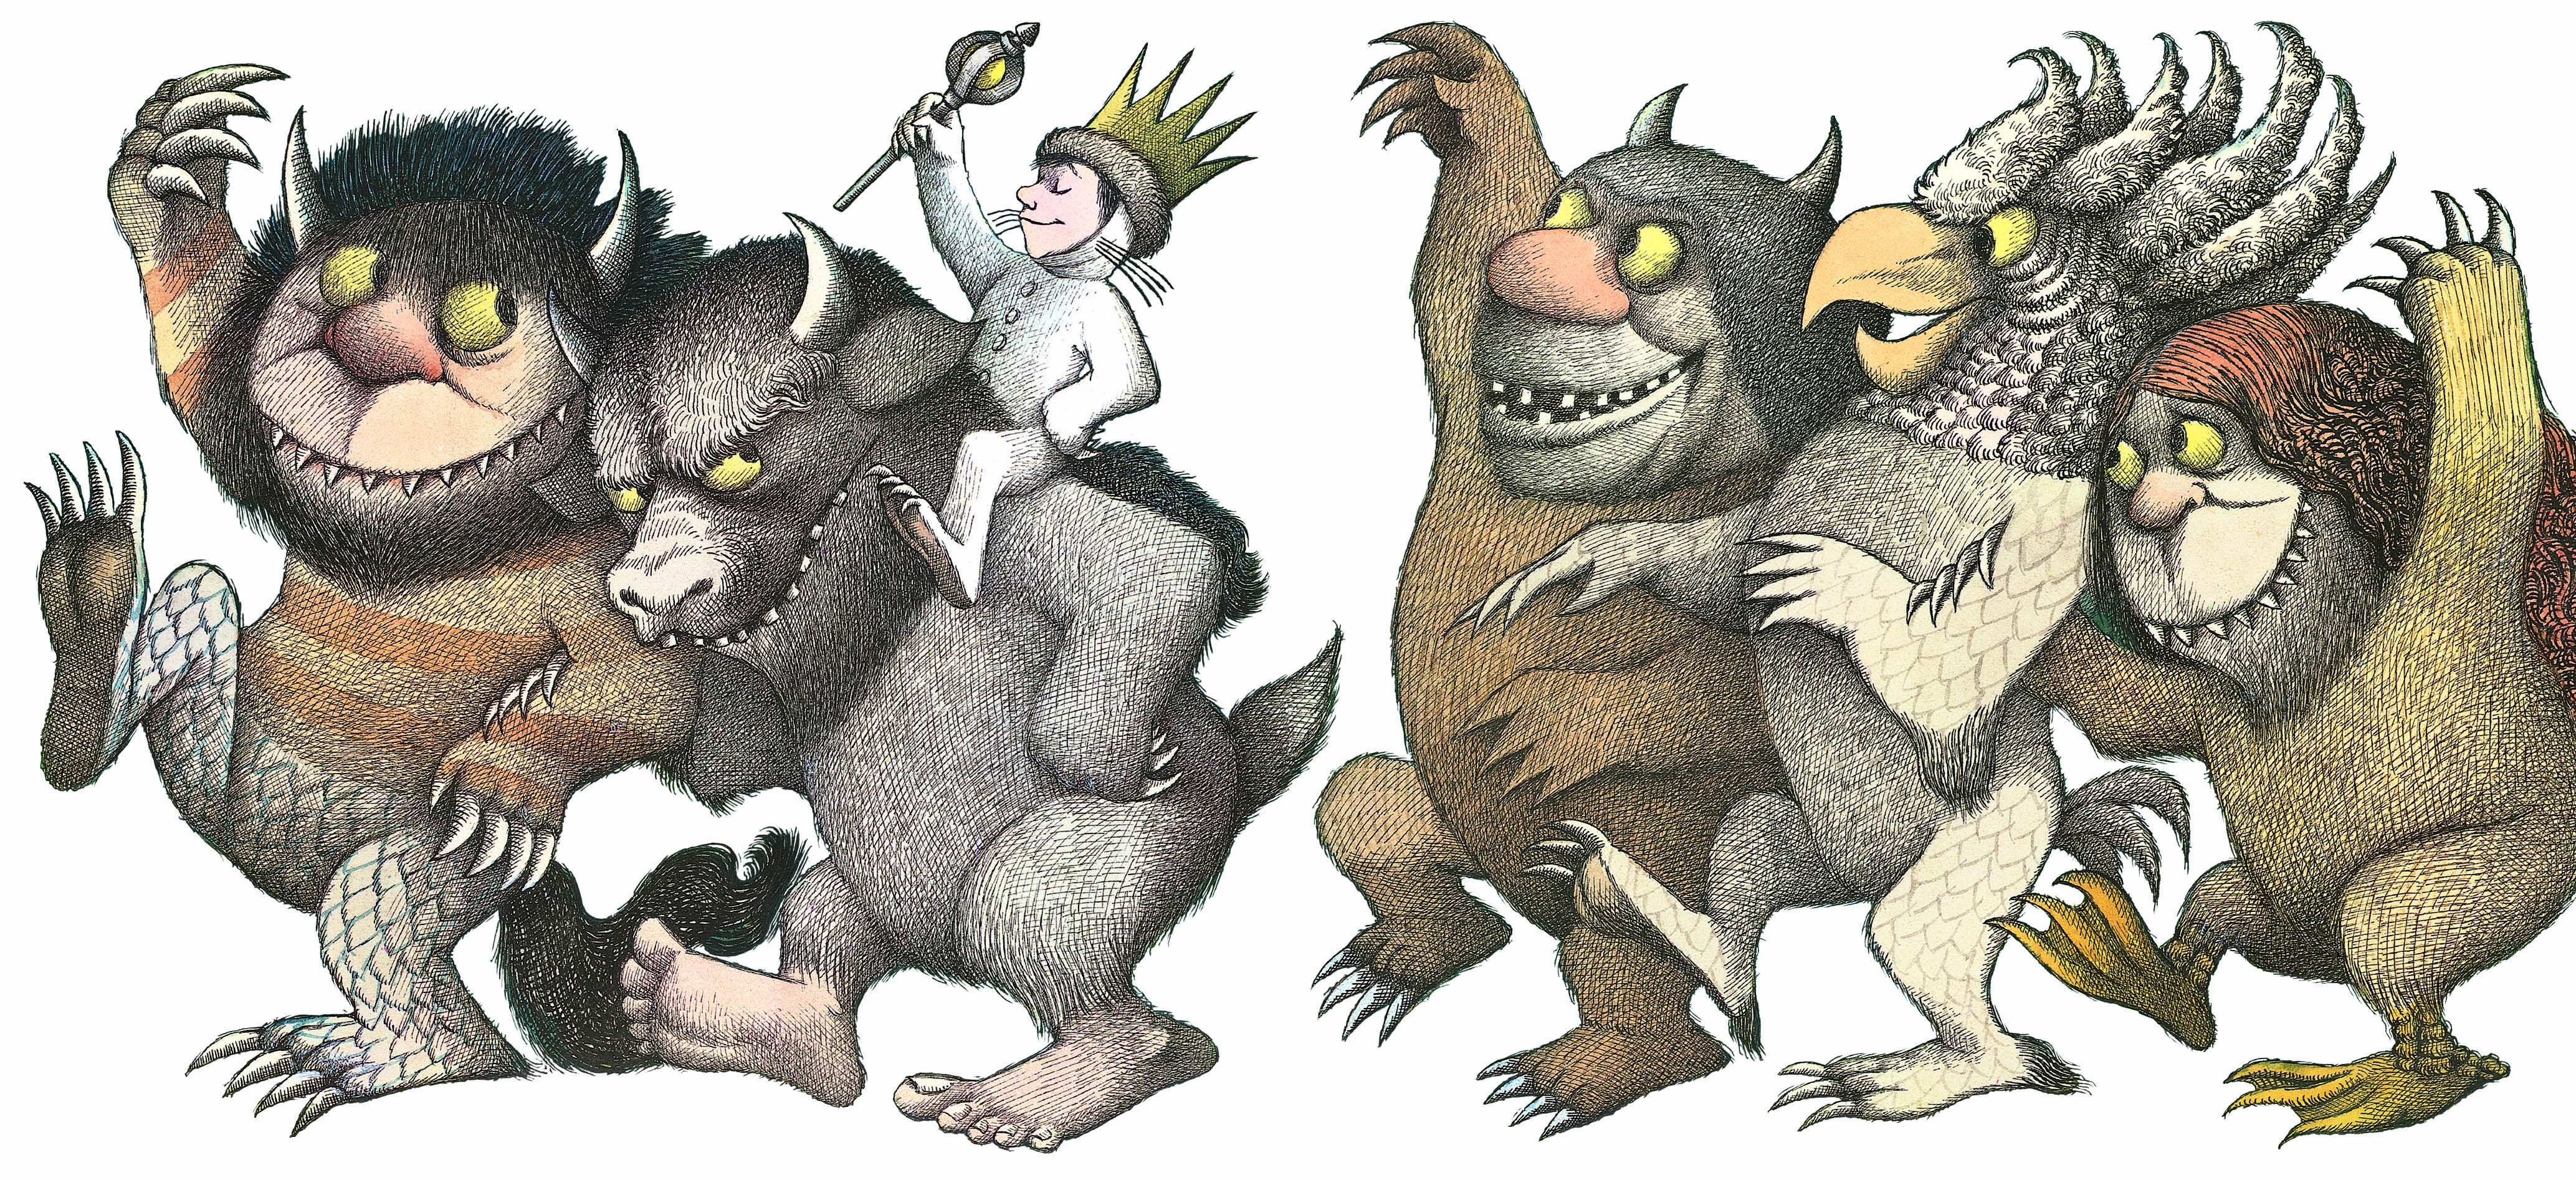 Where The Wild Things Are #16